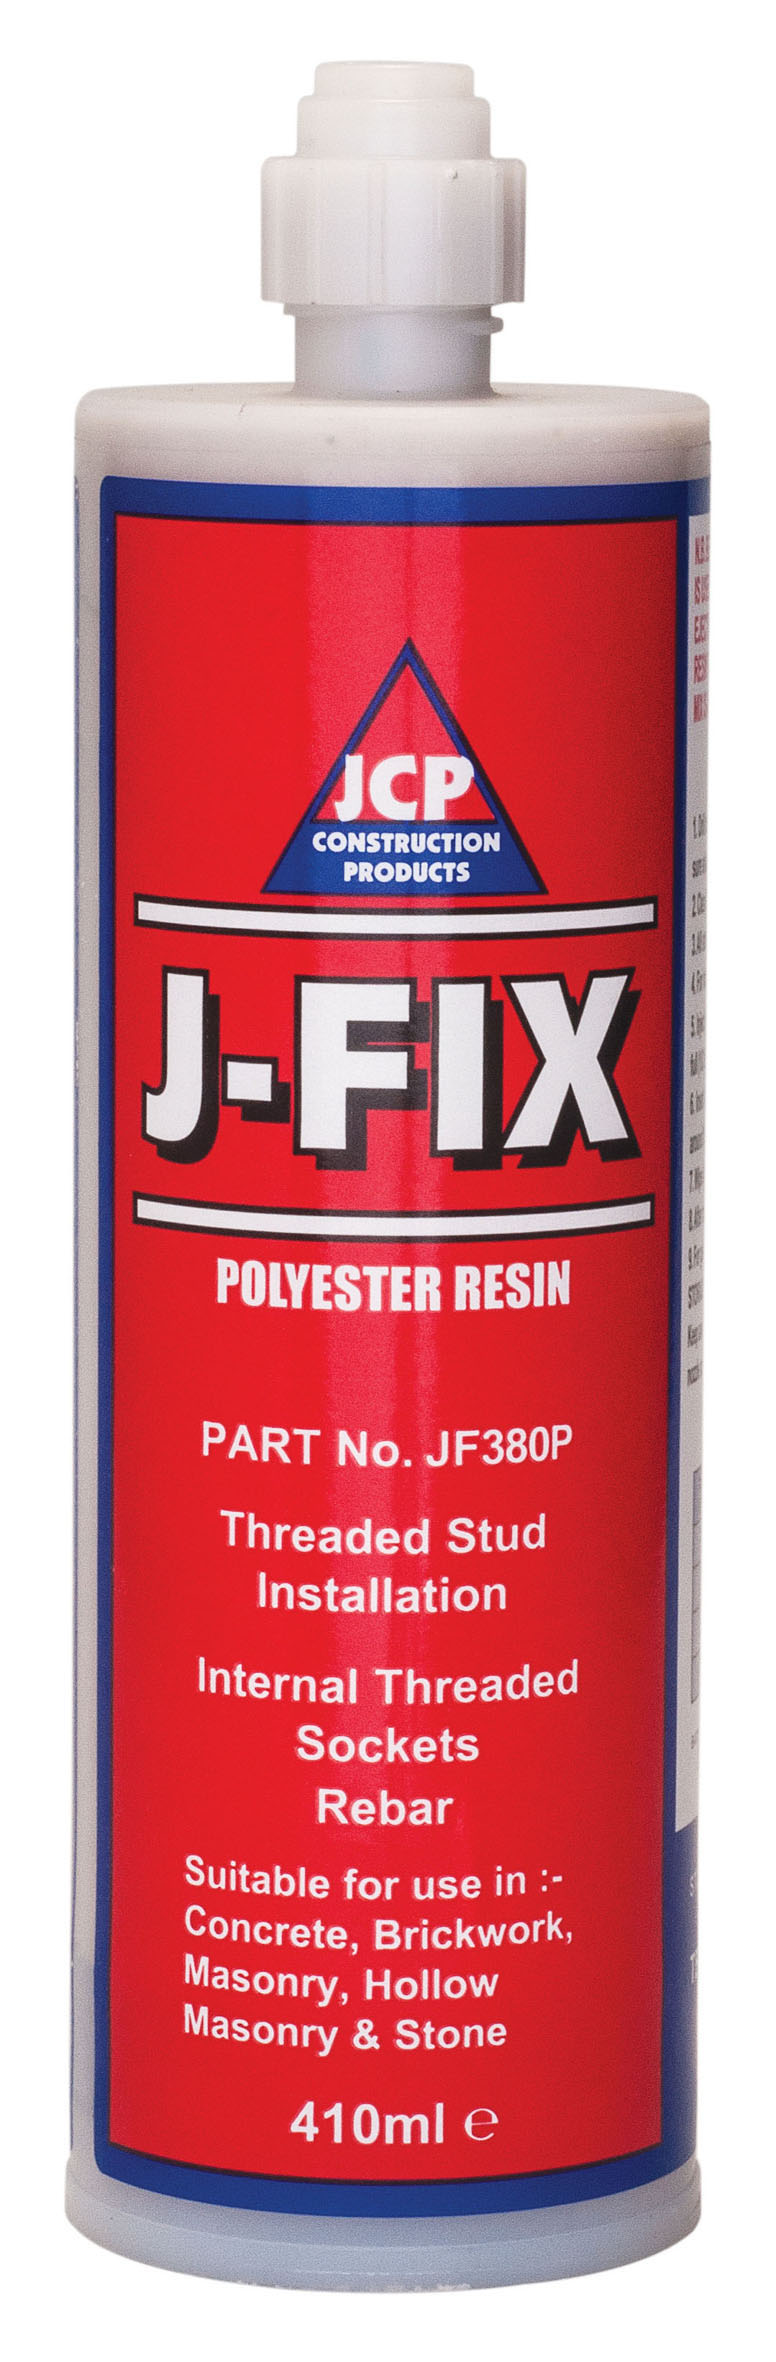 JCP J-Fix Injection Polyester Resin 410ml - JF380P